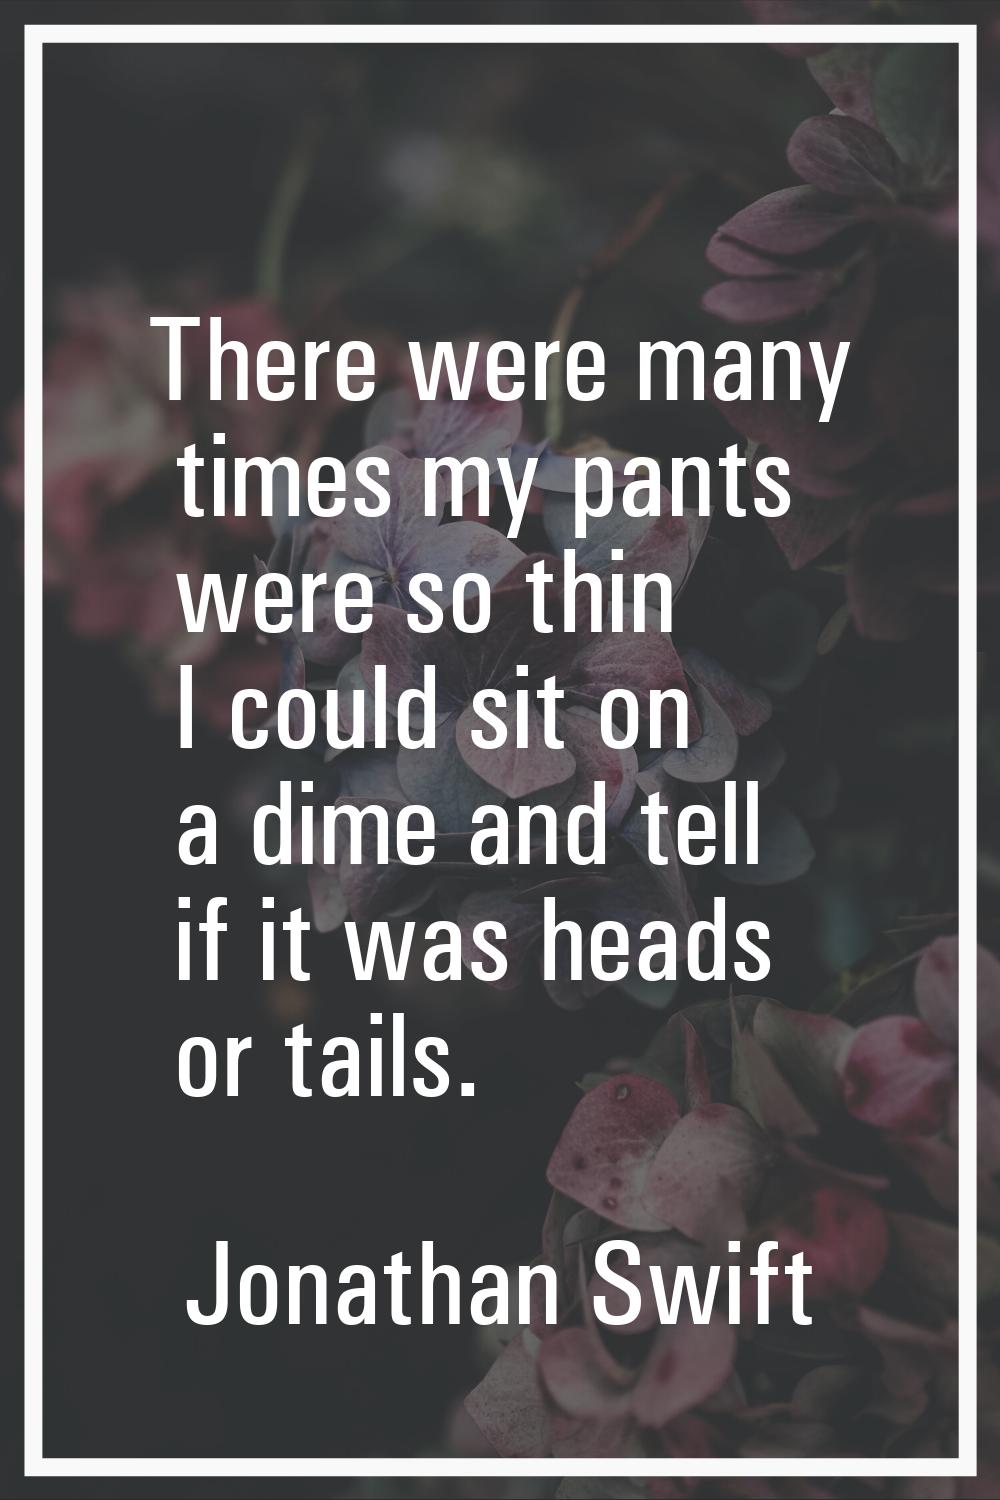 There were many times my pants were so thin I could sit on a dime and tell if it was heads or tails